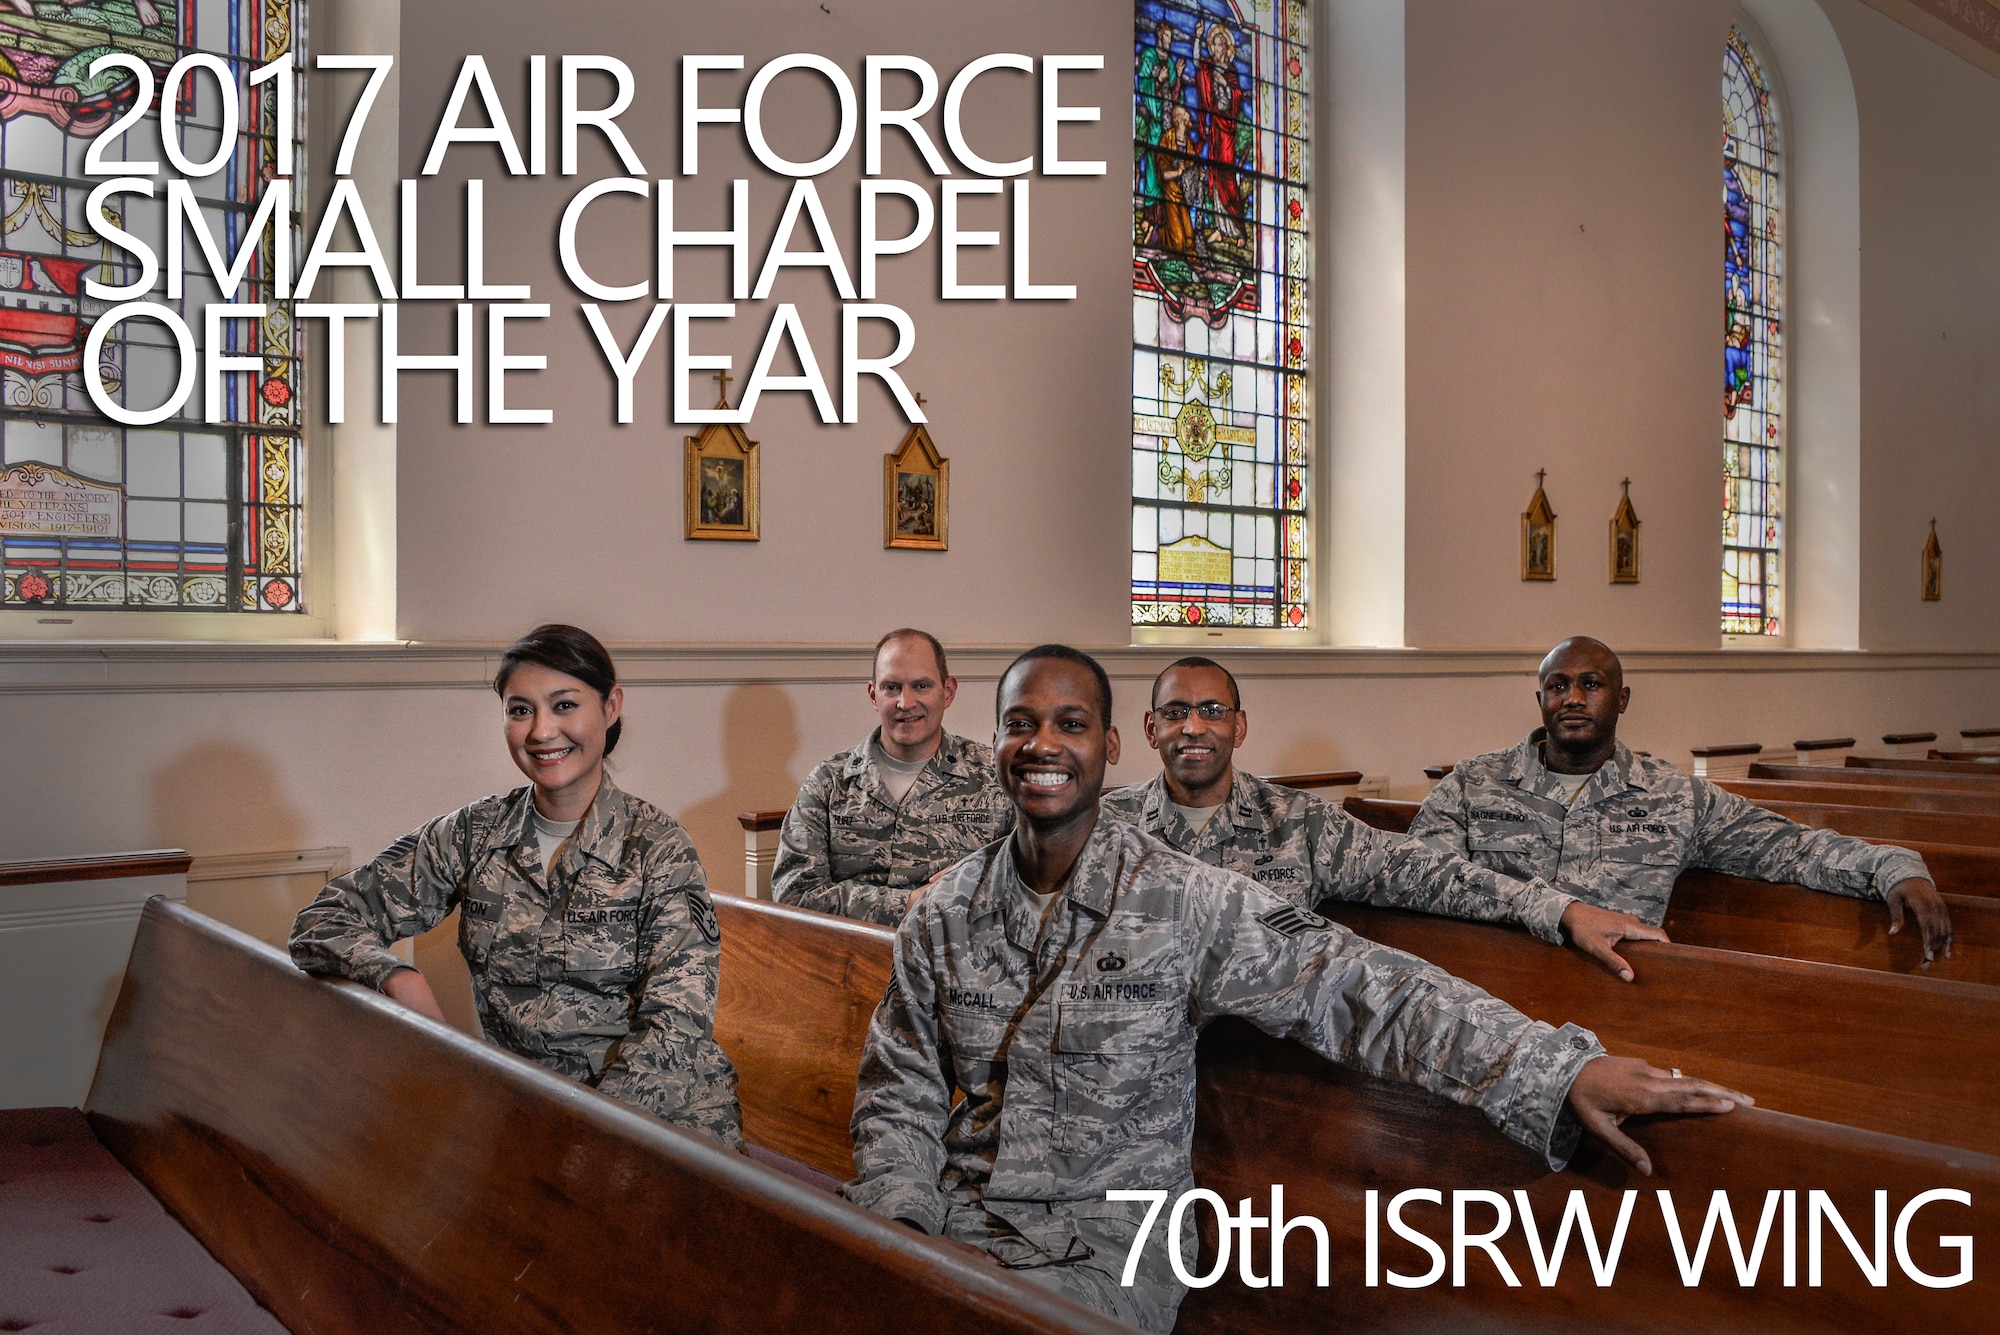 The 70th Intelligence, Surveillance and Reconnaissance Wing chaplain’s office pose for a group photo May 3, 2018, at Fort George G. Meade, Maryland, after being named the 2017 Air Force Best Small Chapel. With a long list of accomplishments throughout the year, this team of five put in the care and effort to strengthen the spiritual pillar of the 70th ISRW’s human weapon system, not just at Fort Meade, but at all of the wing’s  Geographically Separated Units around the world. (U.S. Air Force photo by Staff Sgt. Alexandre Montes)